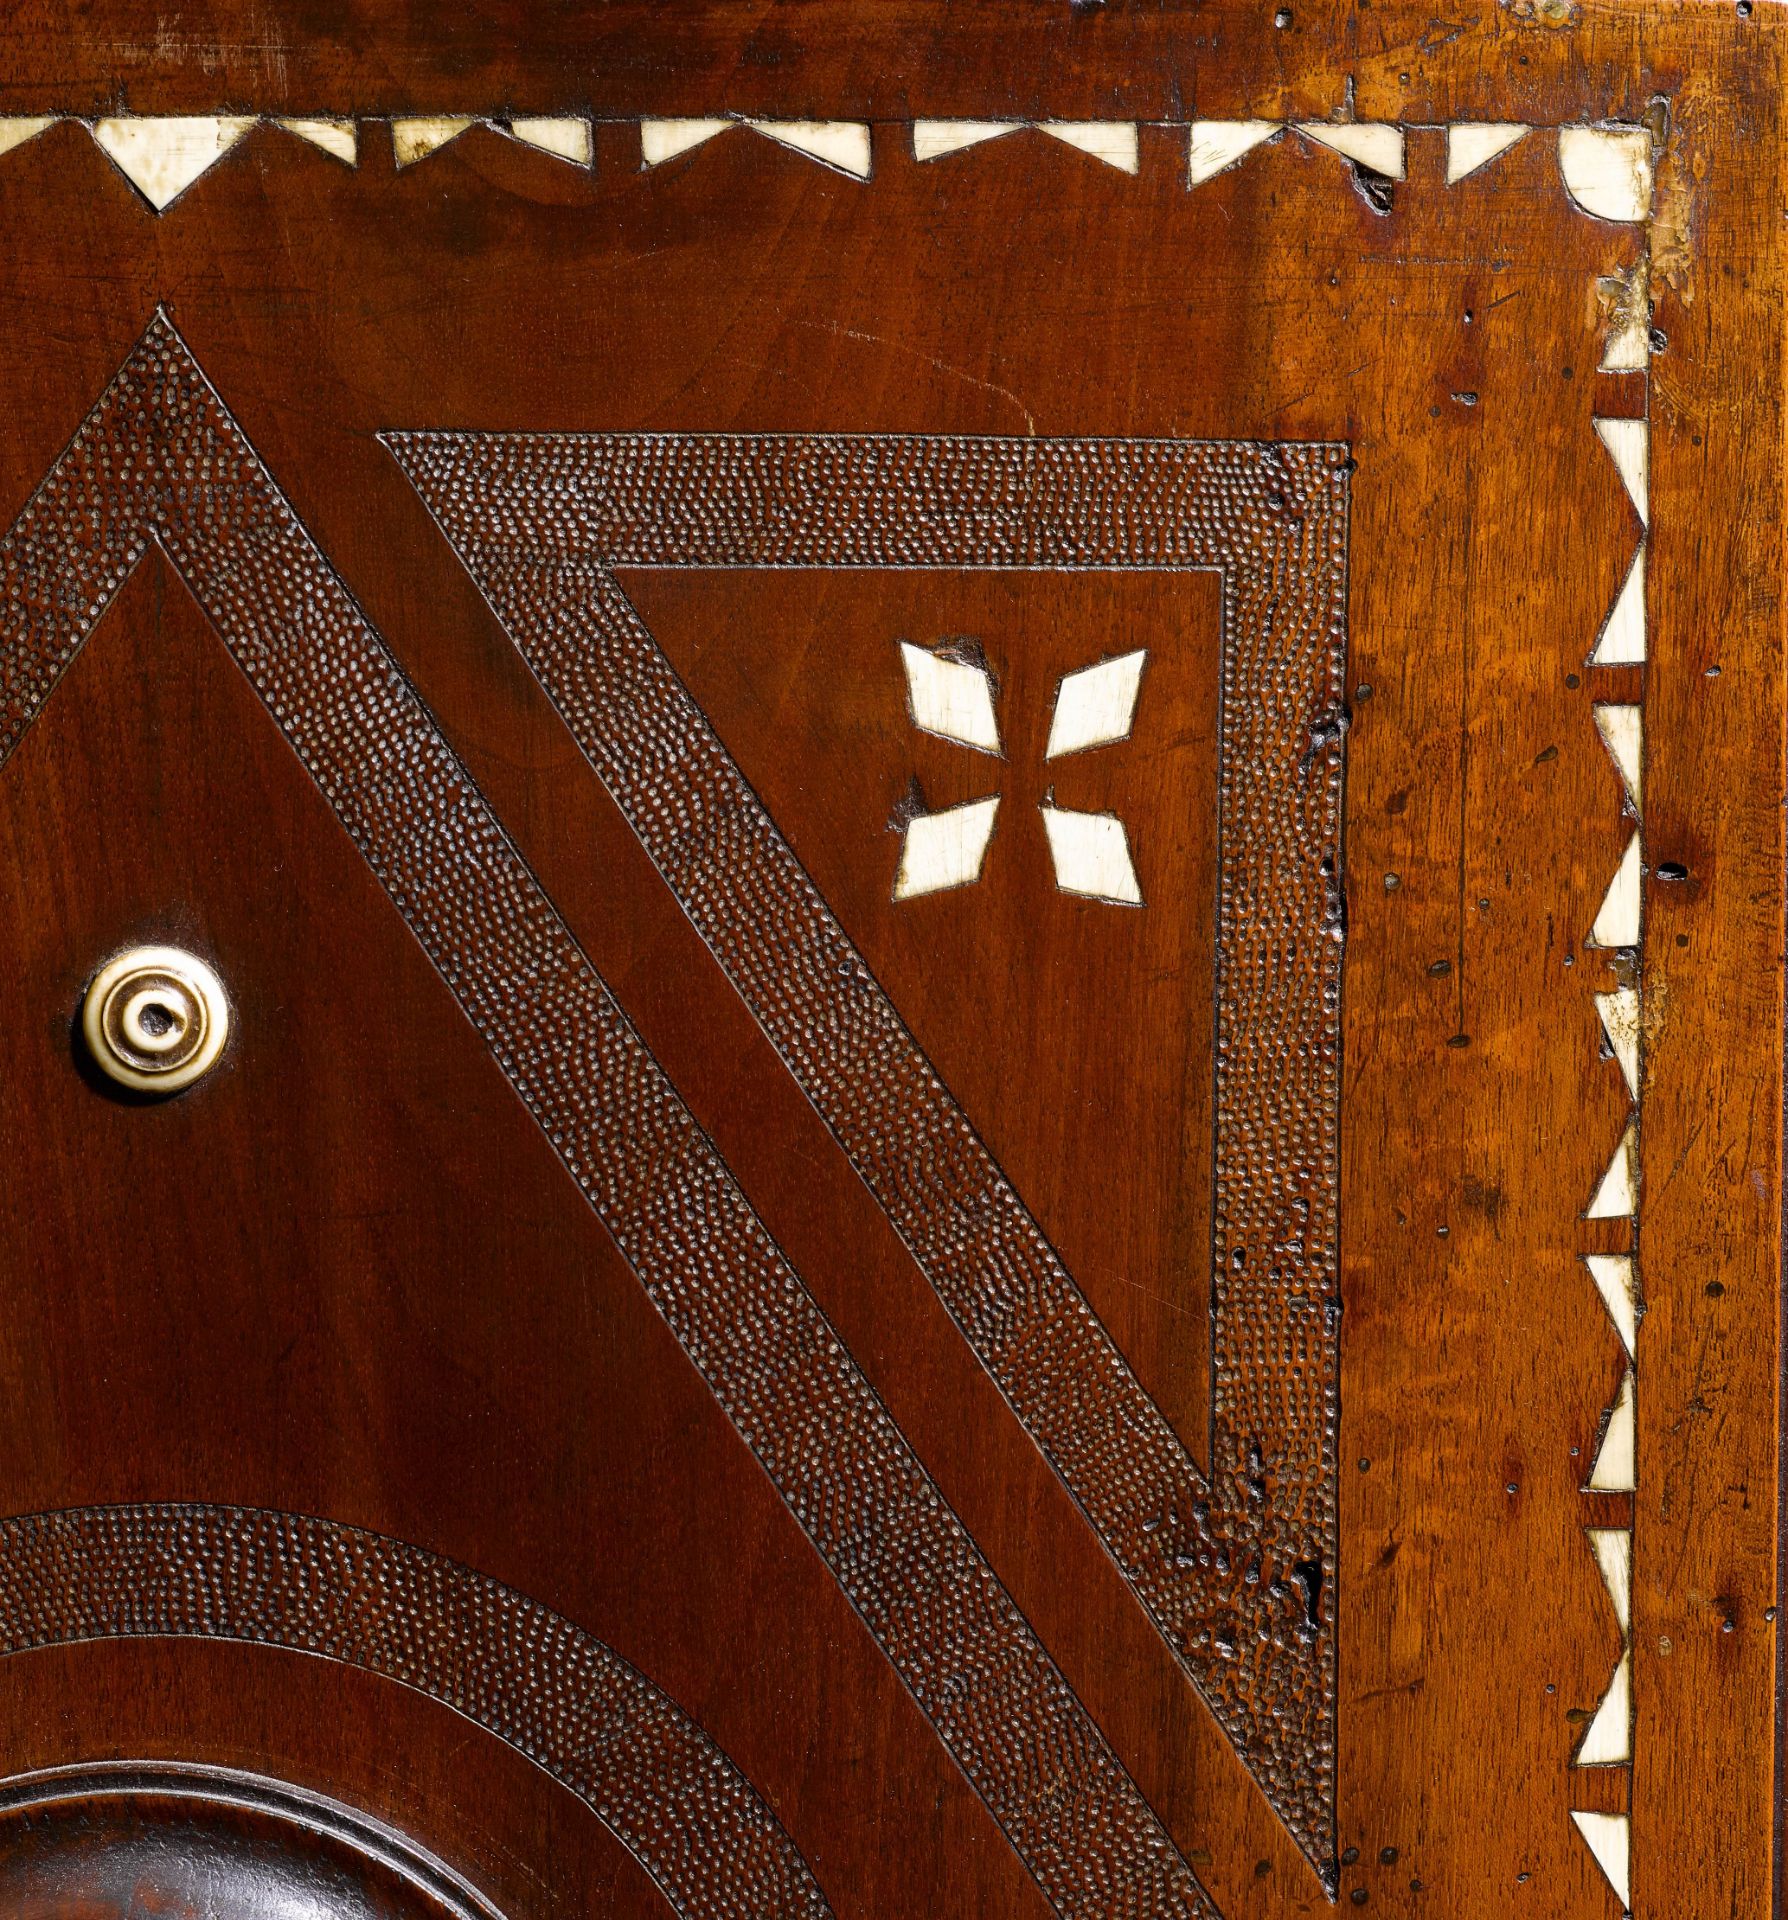 CABINET WITH BONE INLAYS - Image 4 of 5